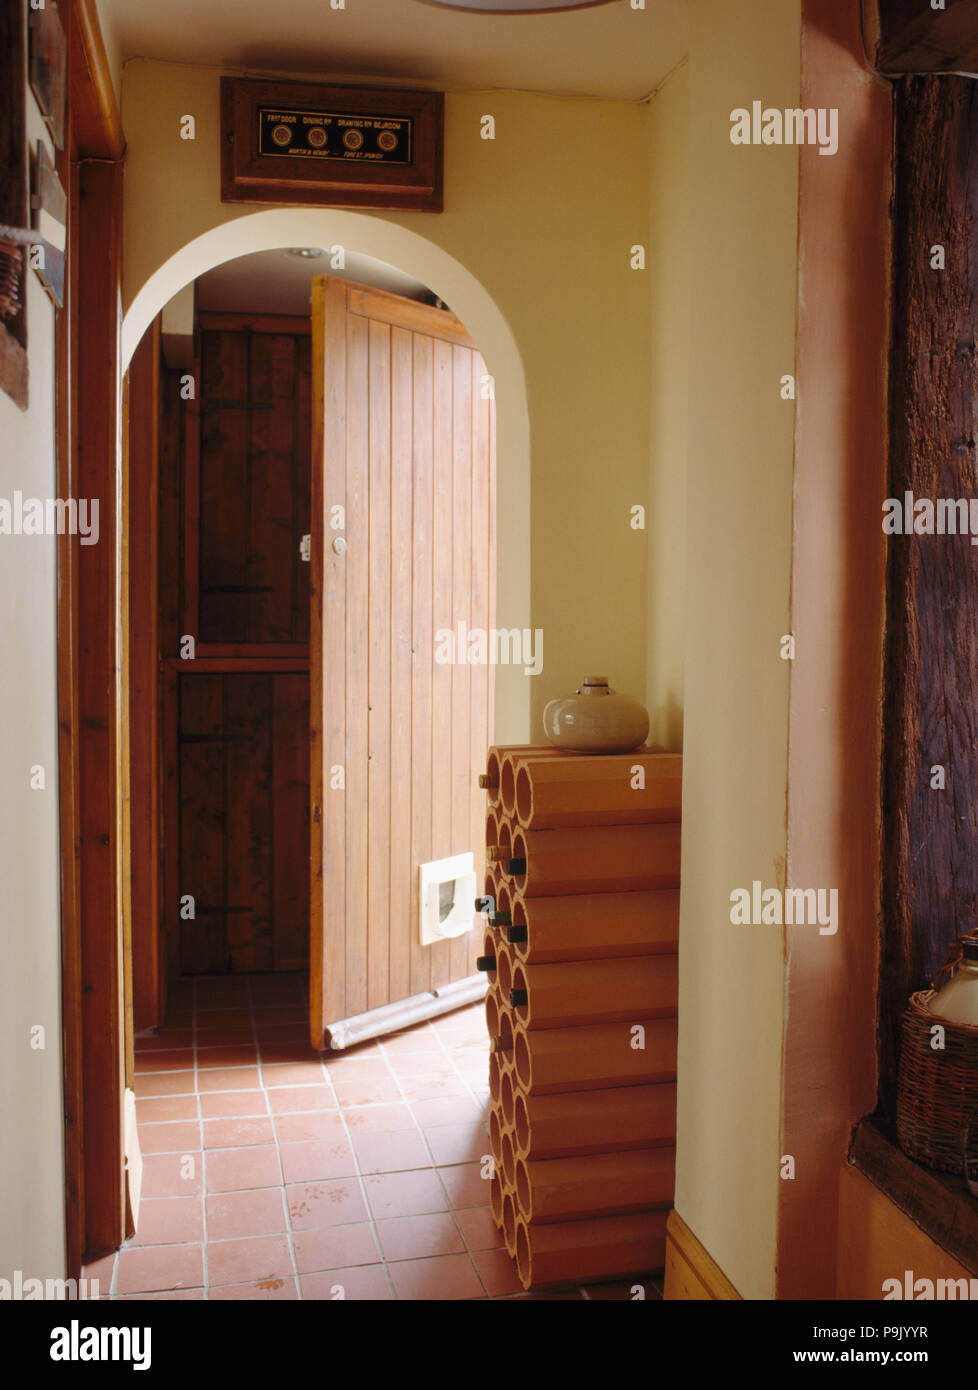 Archway in traditional country hall Stock Photo